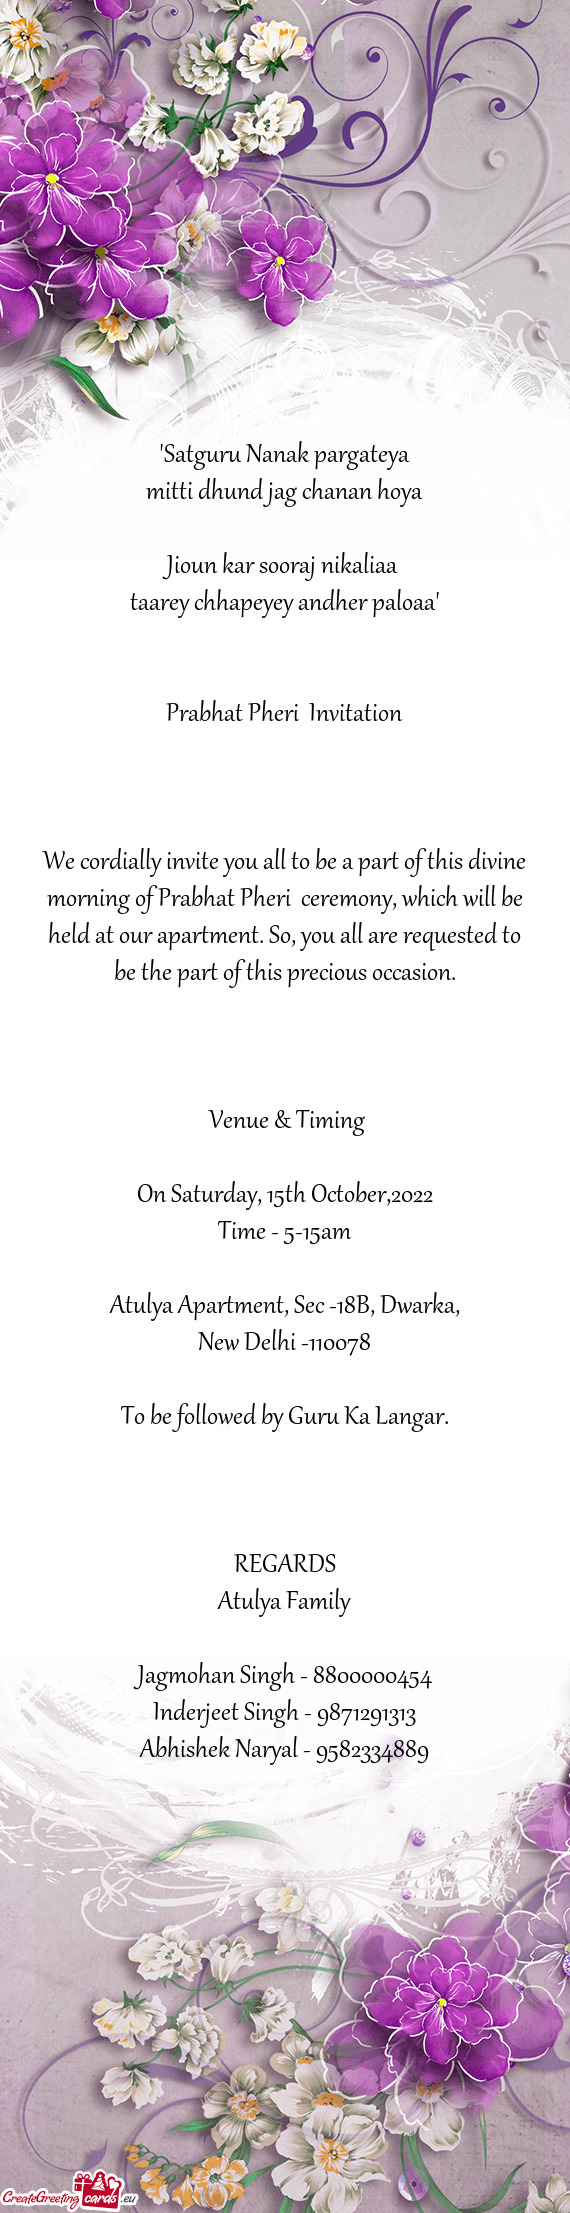 Ll be held at our apartment. So, you all are requested to be the part of this precious occasion